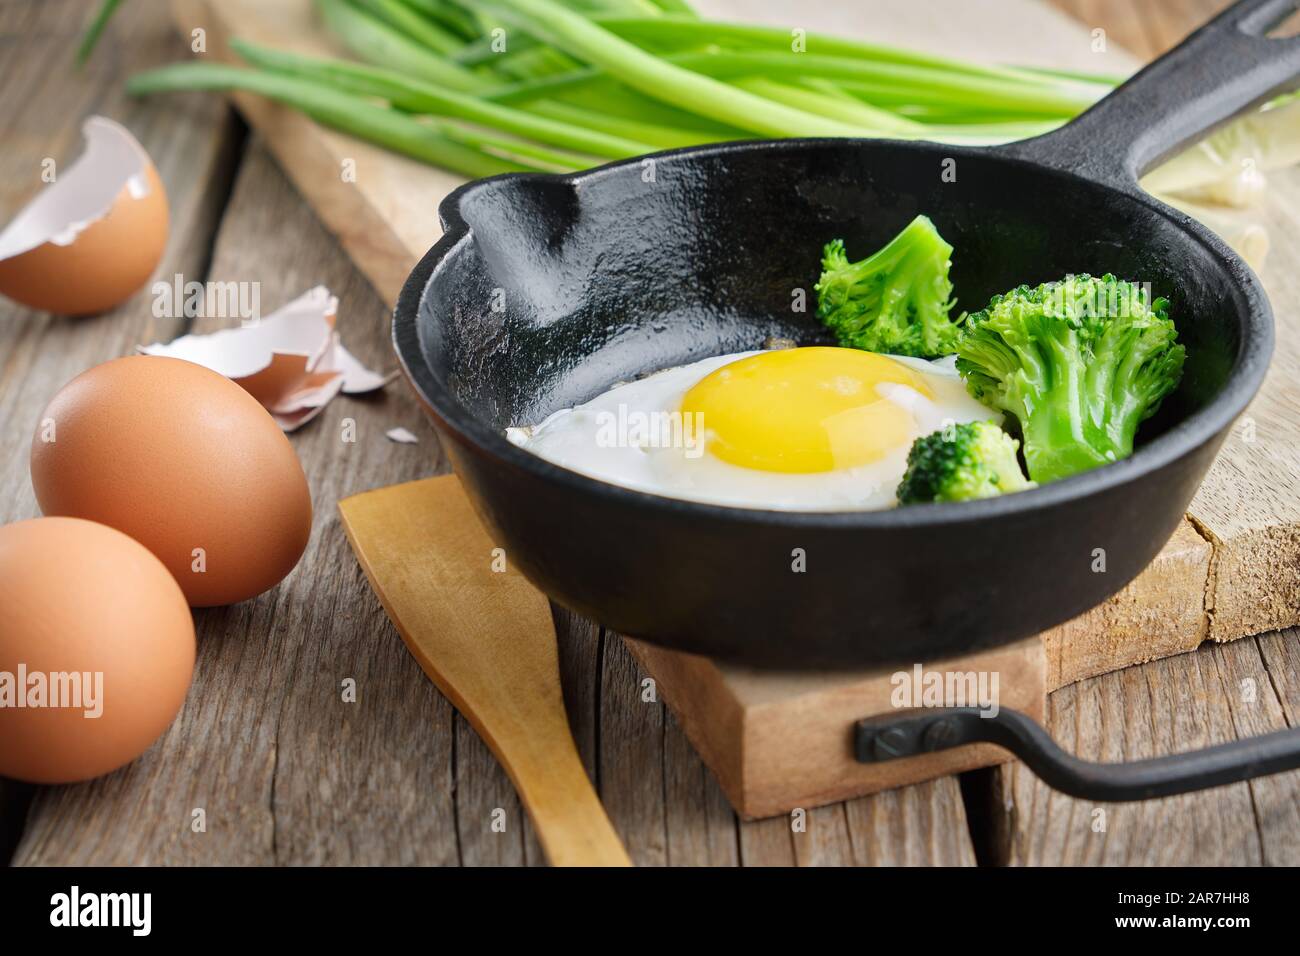 Fried egg with broccoli on a iron frying pan.  Green onion on cutting board. Stock Photo